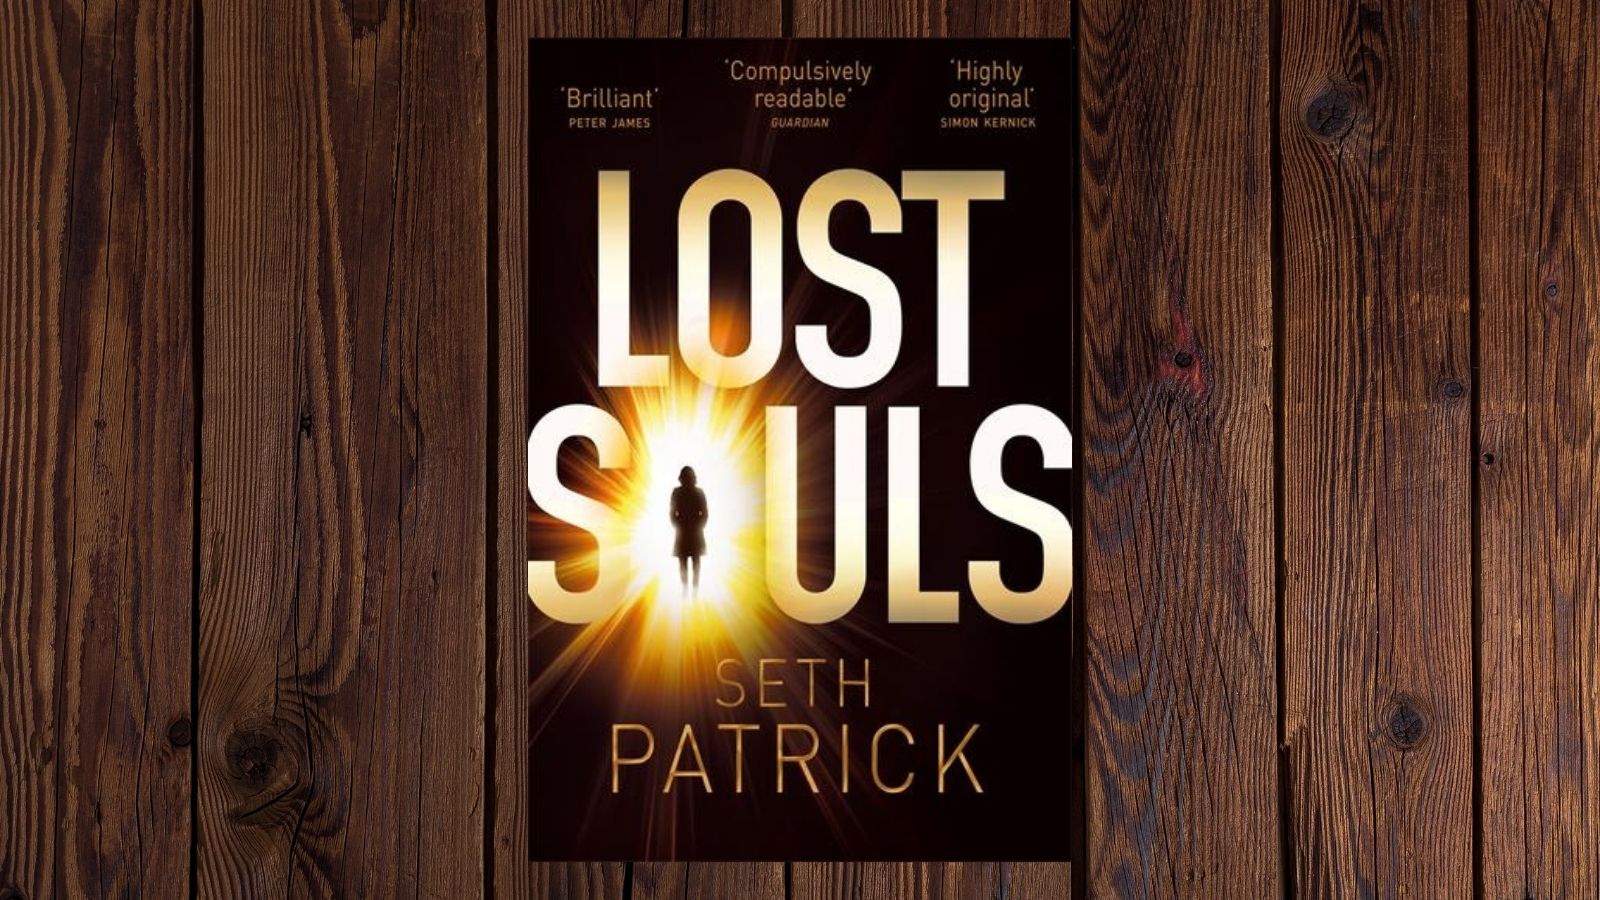 Lost Souls by Seth Patrick book cover